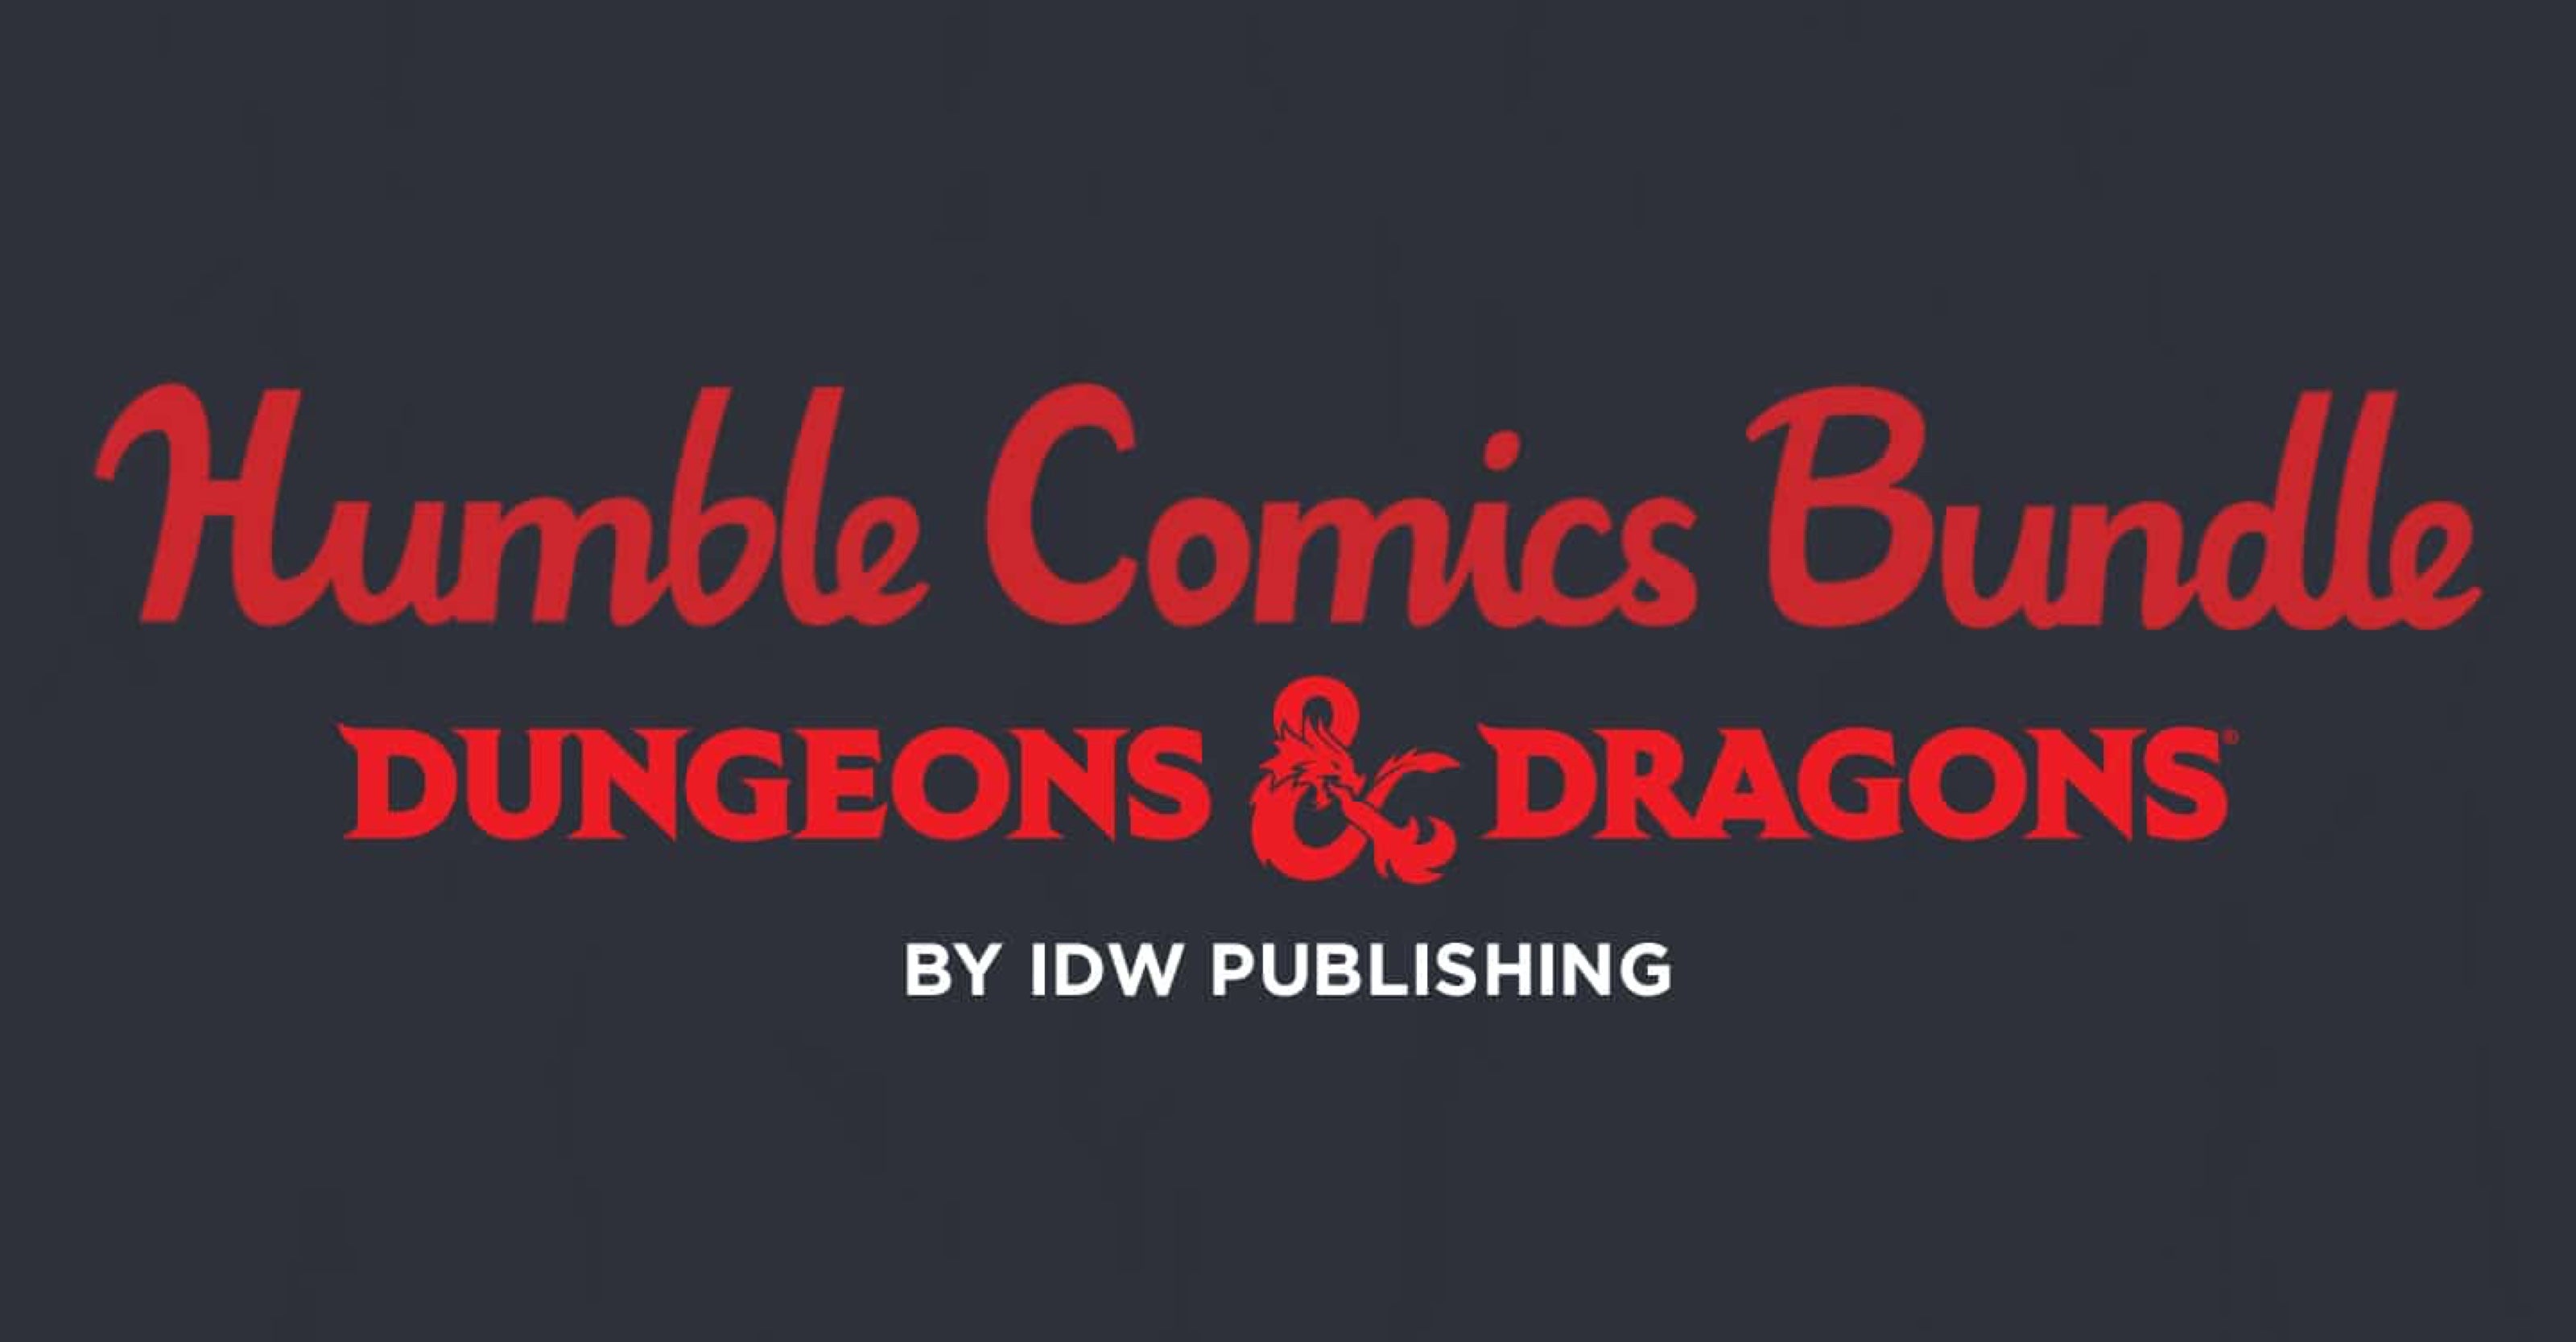 IDW Publishing and Humble Bundle Launches DUNGEONS & DRAGONS Bundle for Comic Lovers